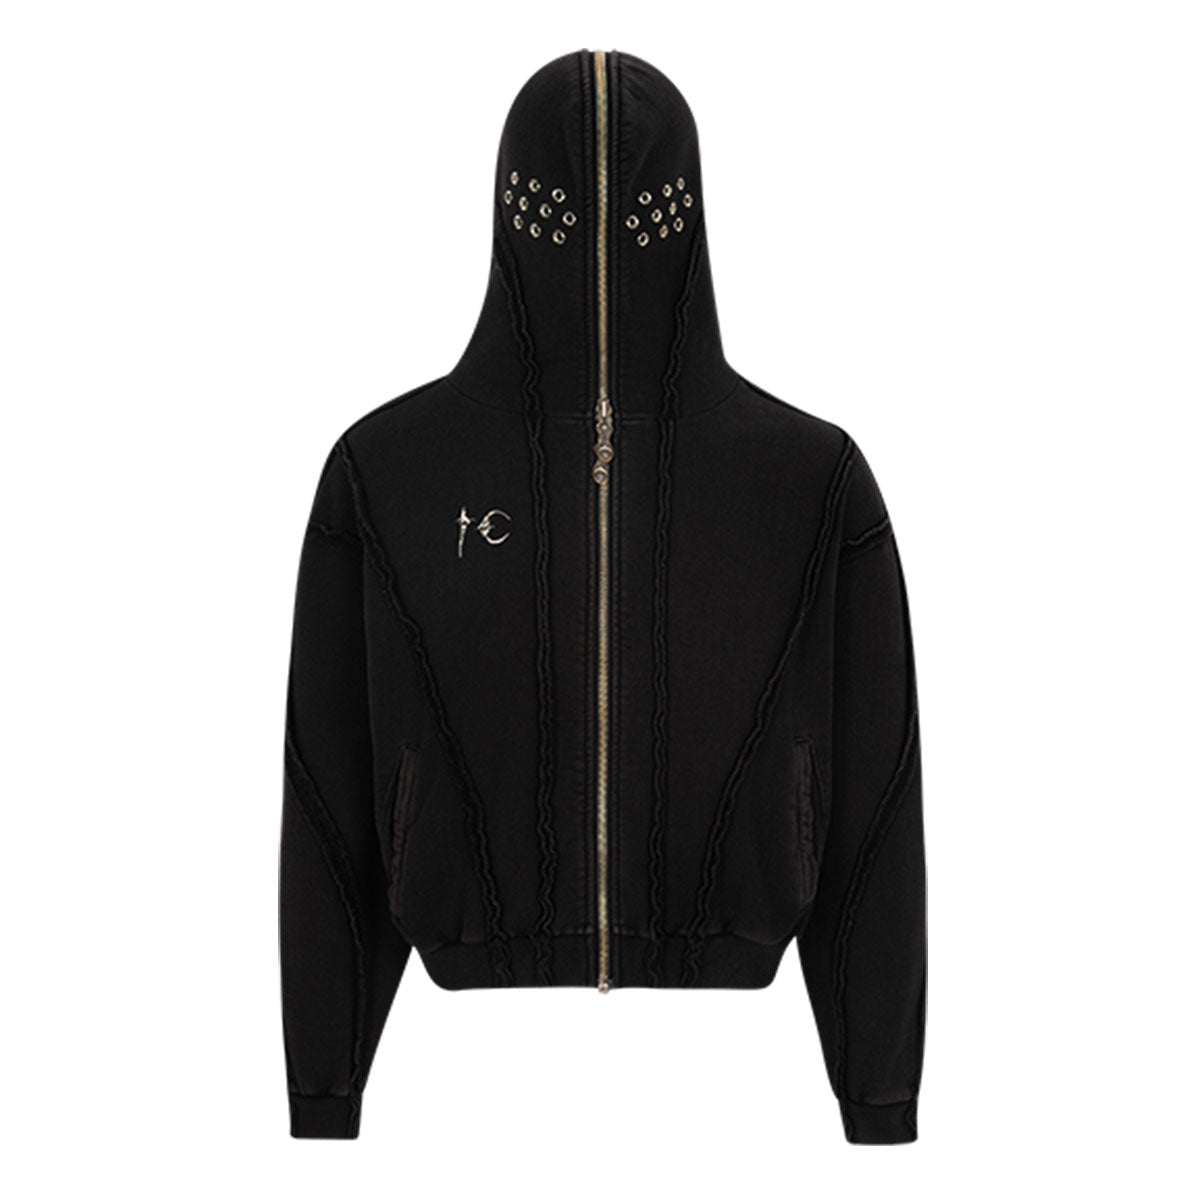 Galdiator Zip-up Hoodie – Why are you here?